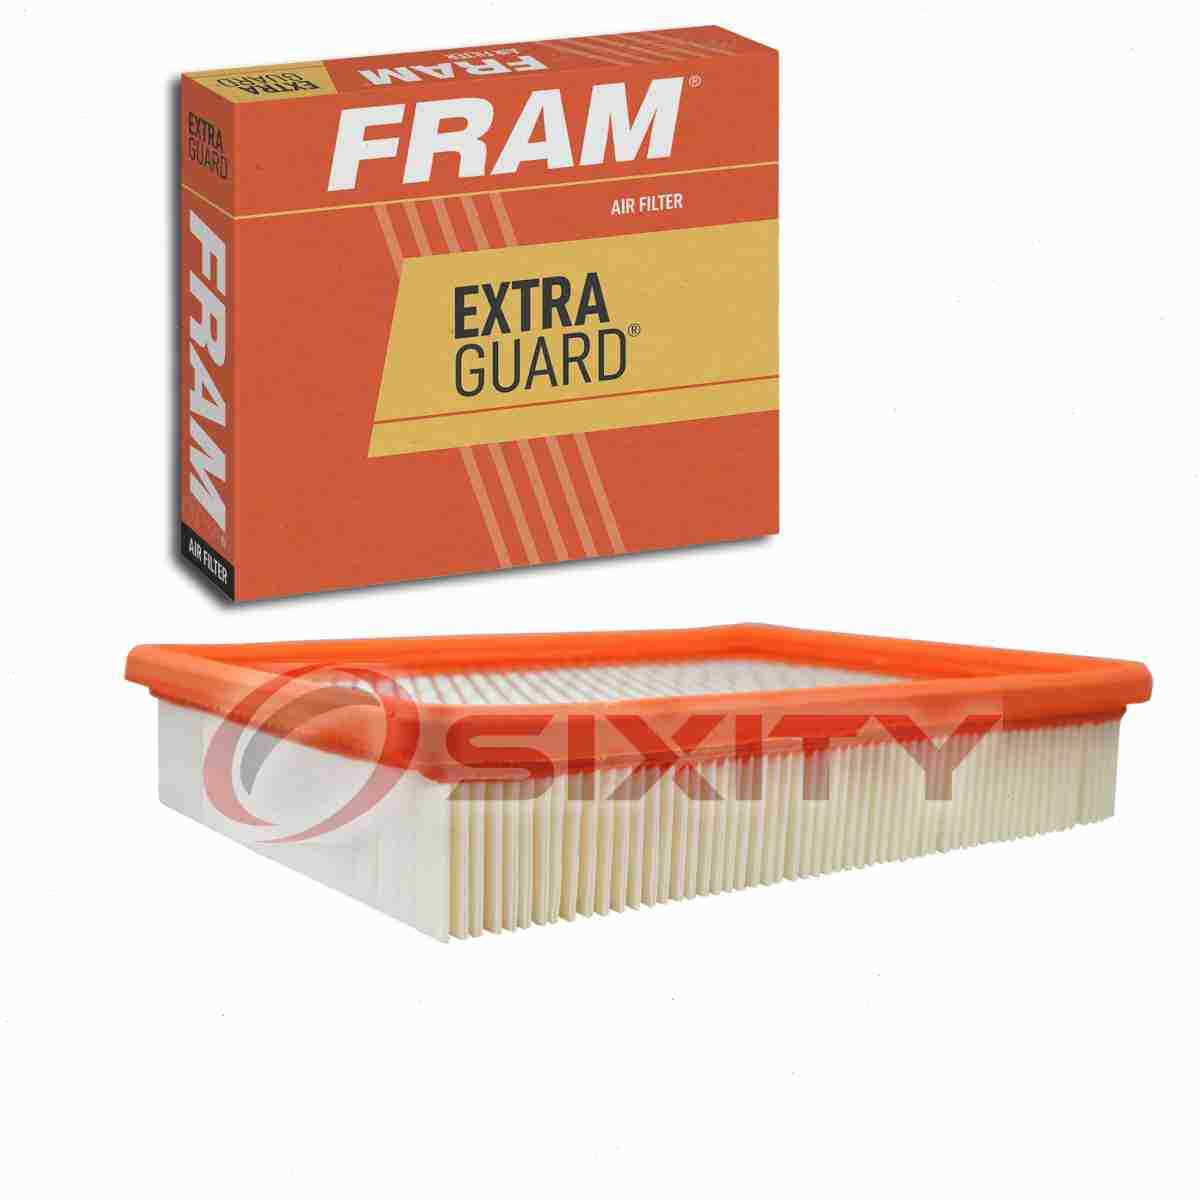 FRAM Extra Guard Air Filter for 2000-2005 Cadillac DeVille Intake Inlet jo